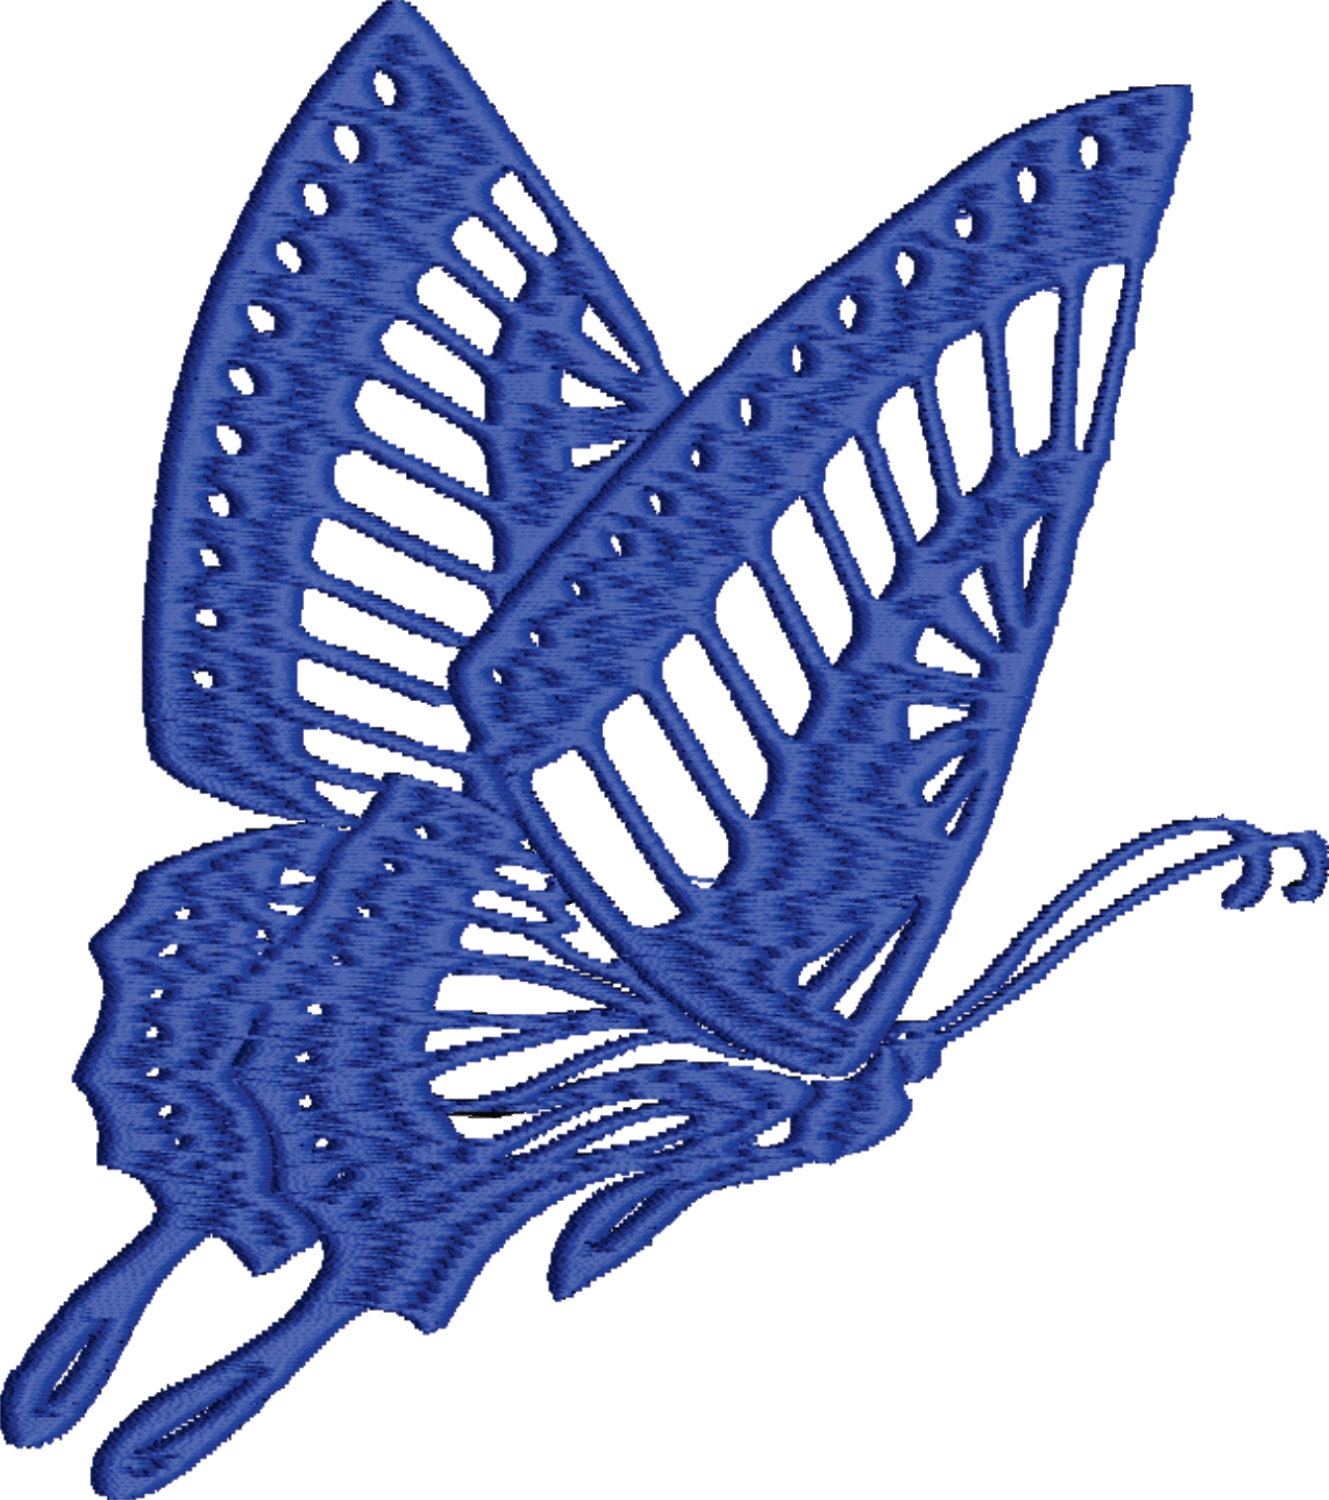 Butterfly and Flower Embroidery Design File .vip .vp3 .hus .pes .pec .jef .sew .xxx .csd .dst .exp .emd .10o .pcs .pcm Fits 4x4 hoop